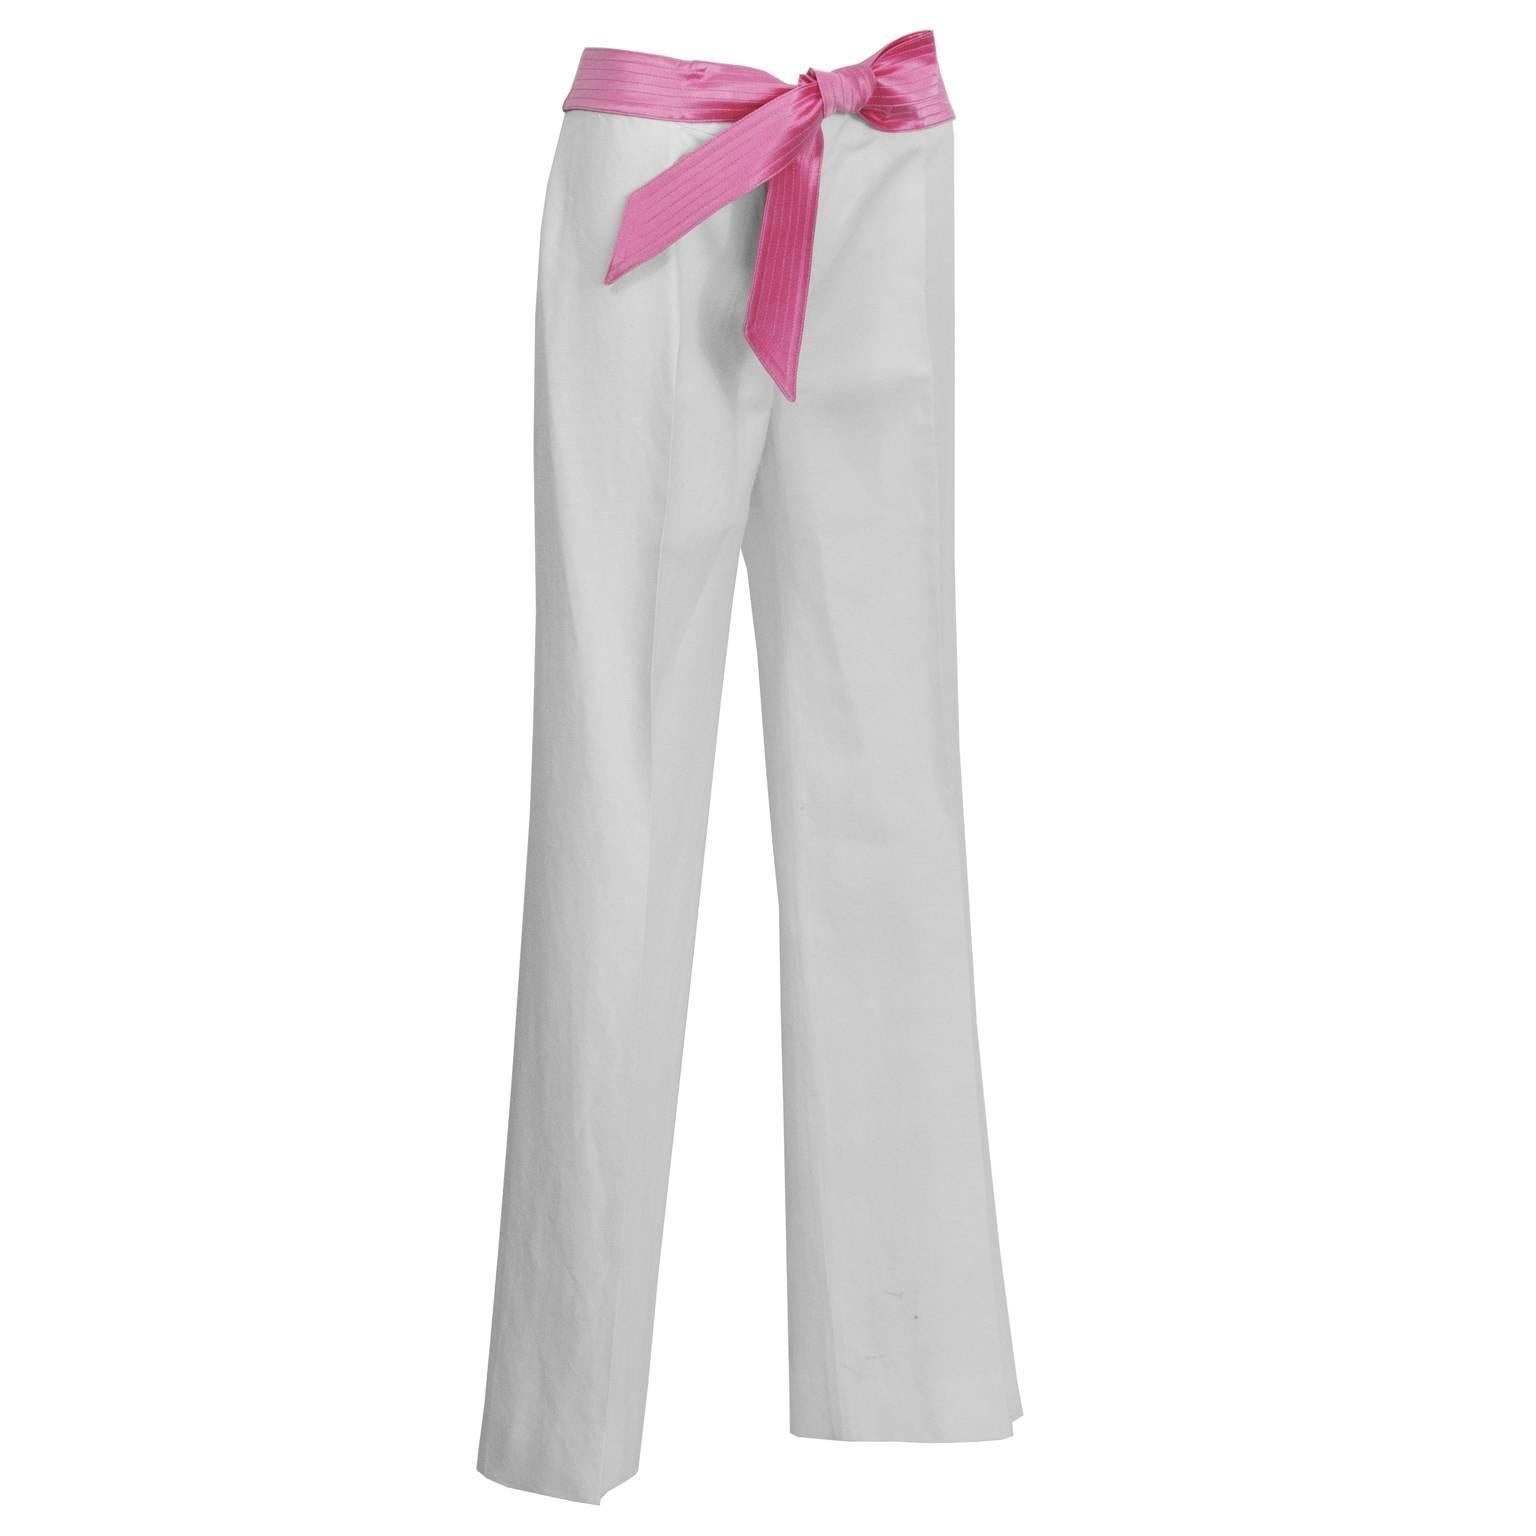 These chic Valentino 1990's cream trousers are perfect for your summer wardrobe. Wide legged linen pants featuring attached pink satin ribbon belt and front zip closure. Excellent vintage condition. Fit like a US 4.